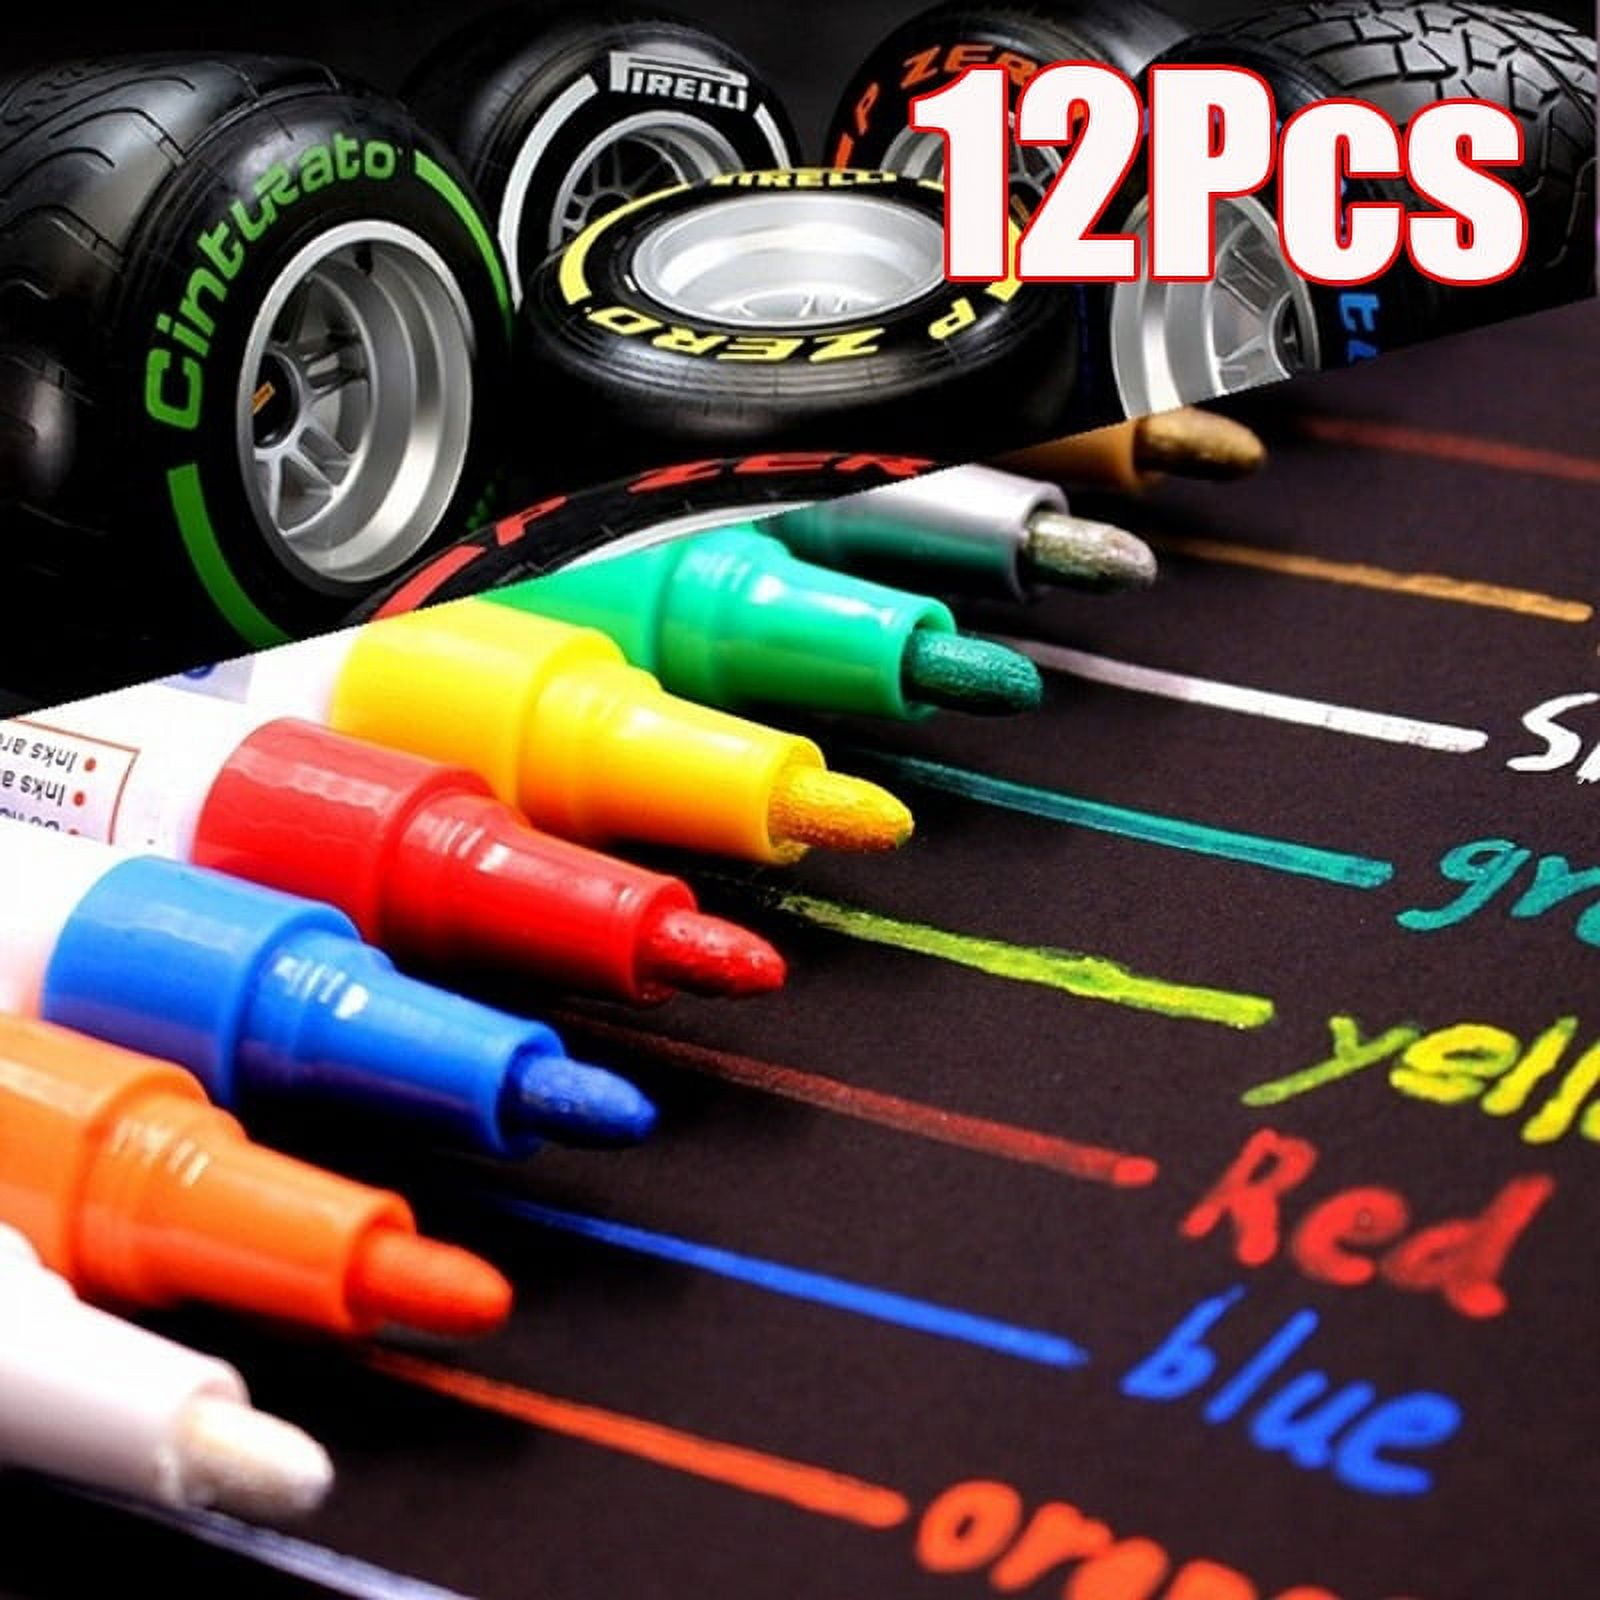 20 Color Paint Markers Pens Set Oil-Based Permanent Paint Marker Quick Dry  and Waterproof Paint Pen for Car Tire Rock Painting - AliExpress